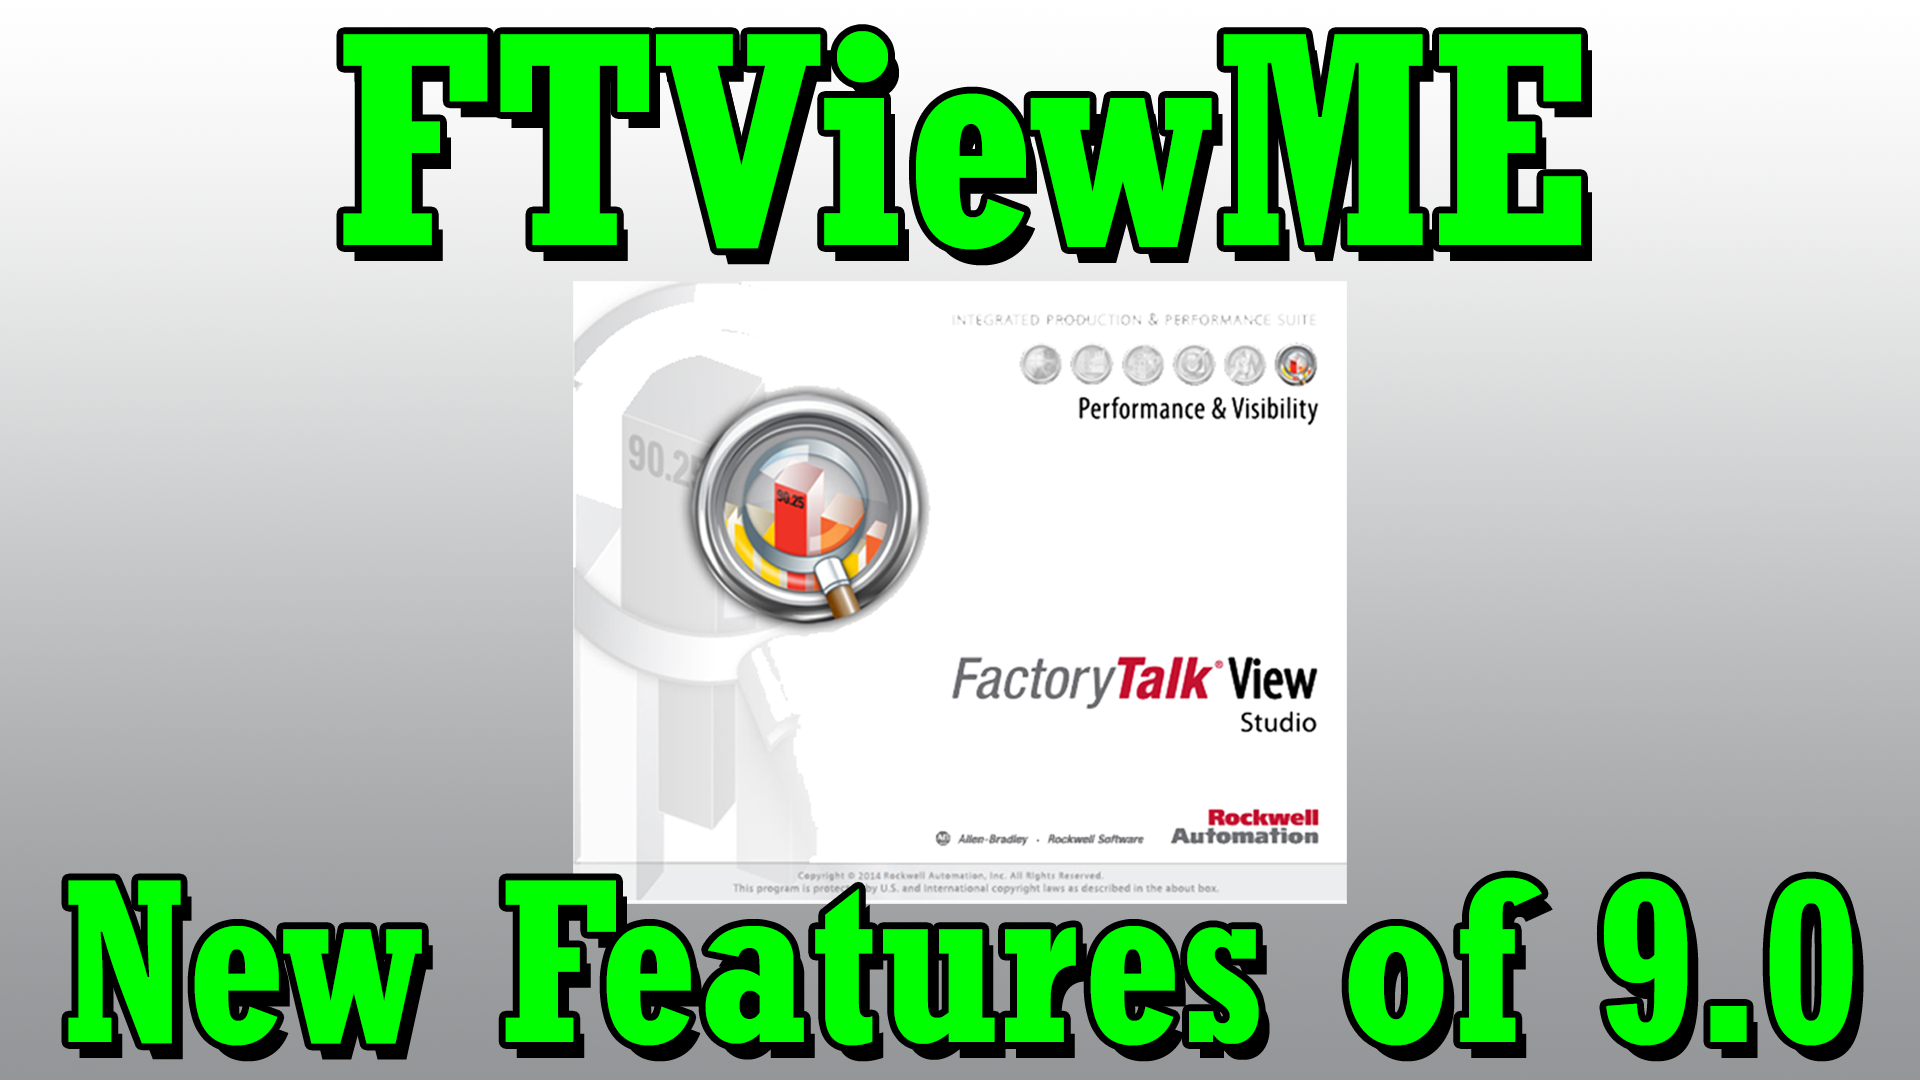 The New Features Of FactoryTalk View Machine Edition 9.0 (P38)